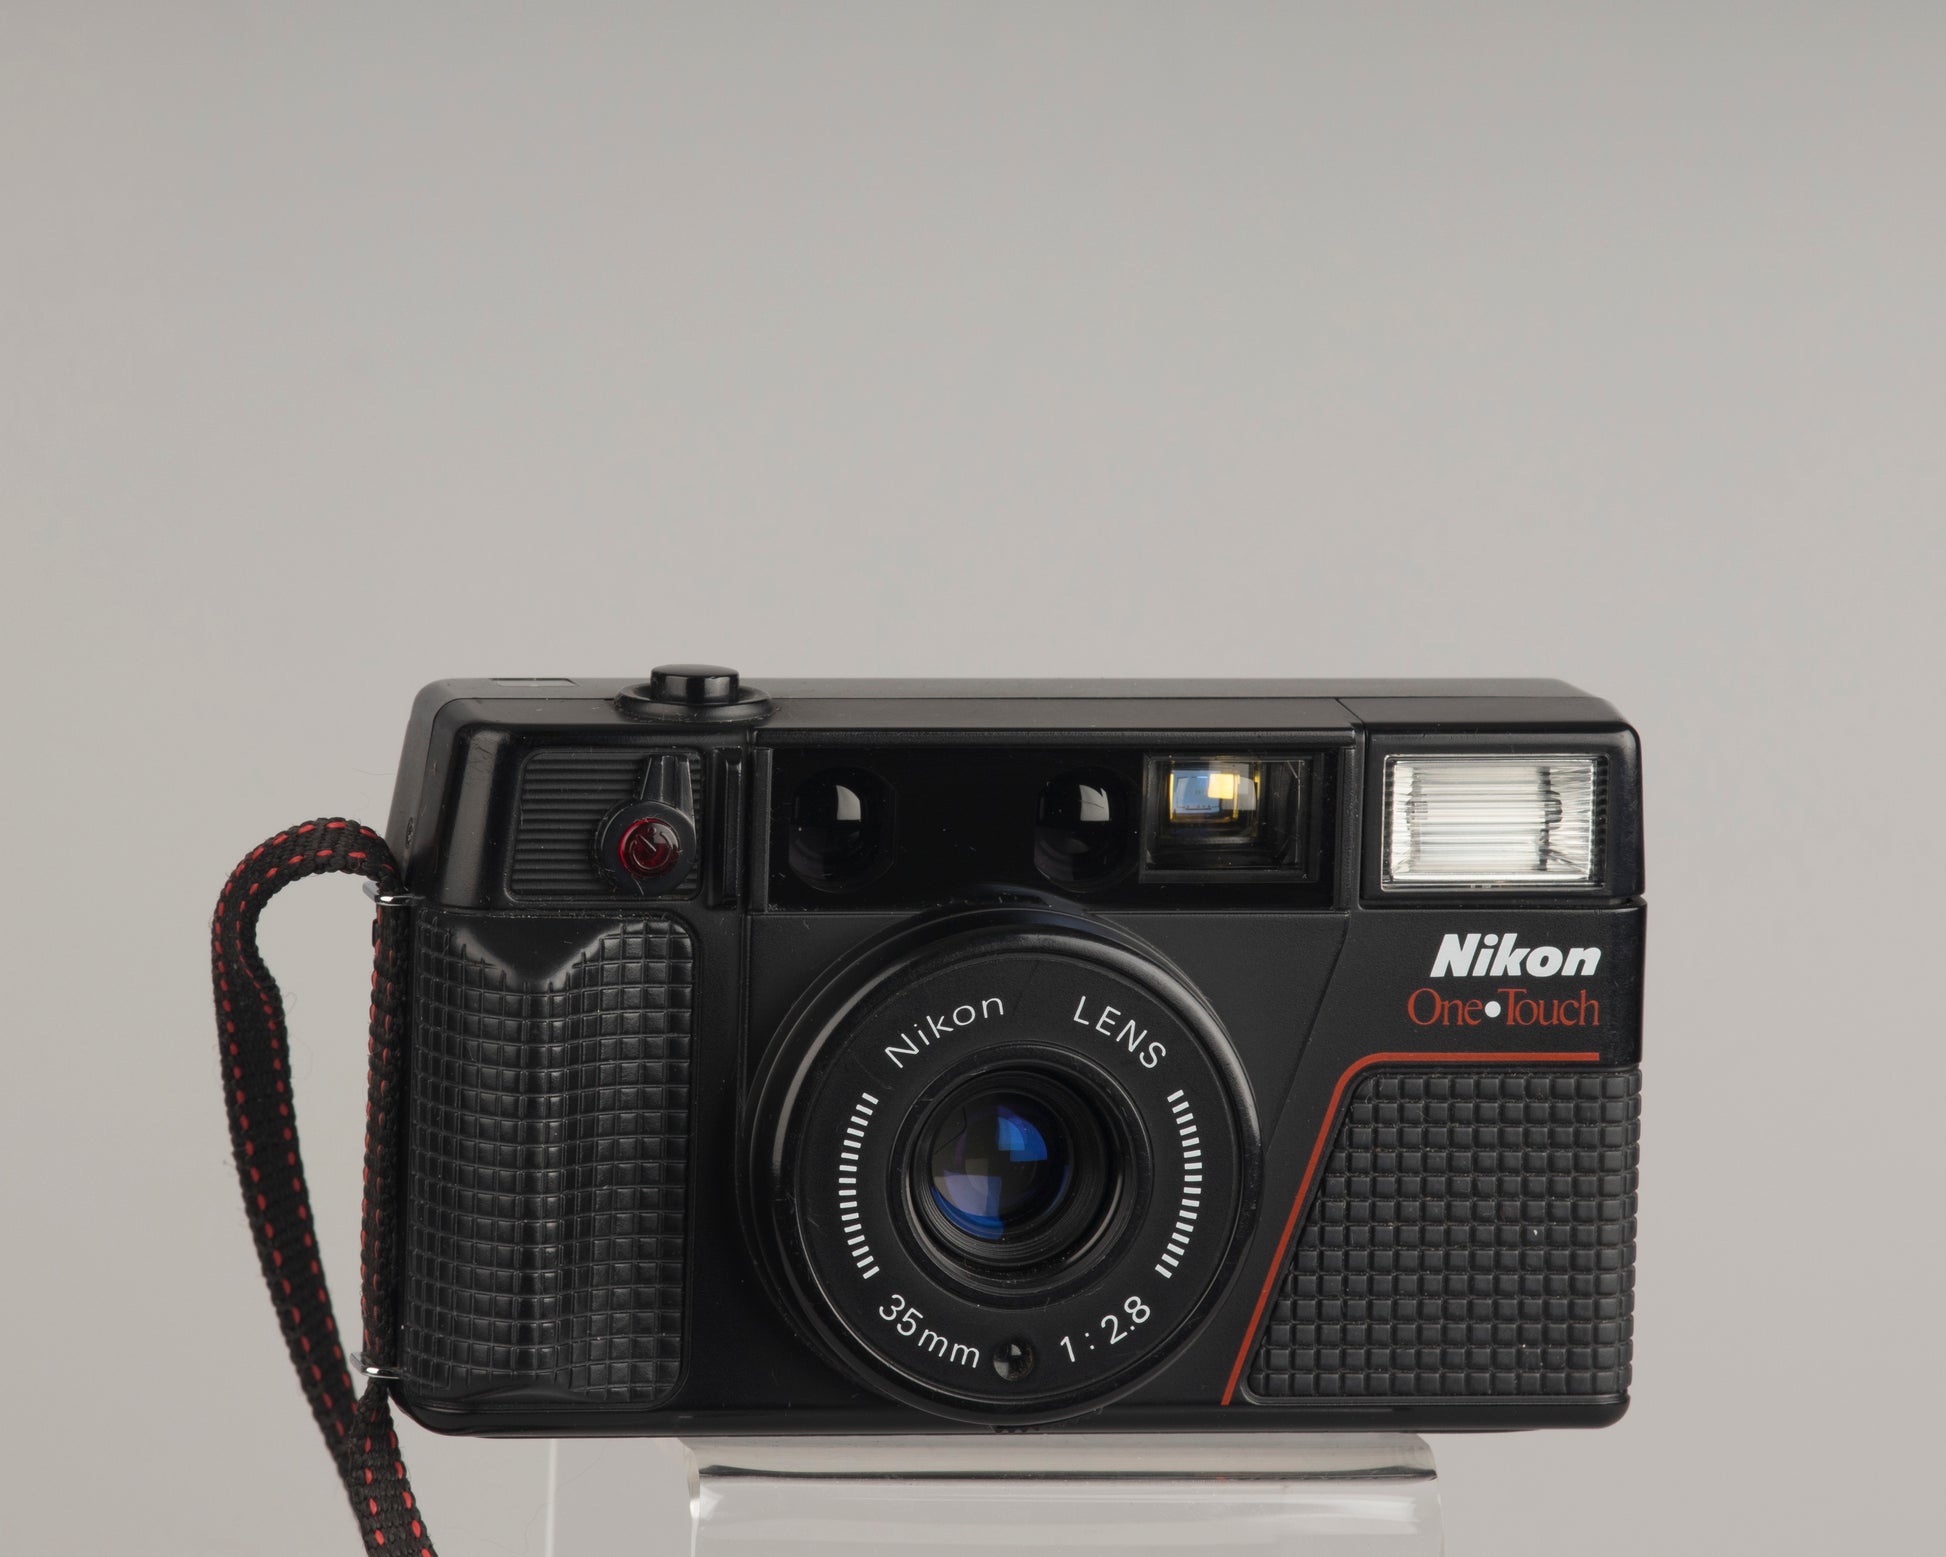 The Nikon One Touch (aka L35AF2) is a classic 1980s 35mm point-and-shoot camera with a sharp 35mm f2.8 lens